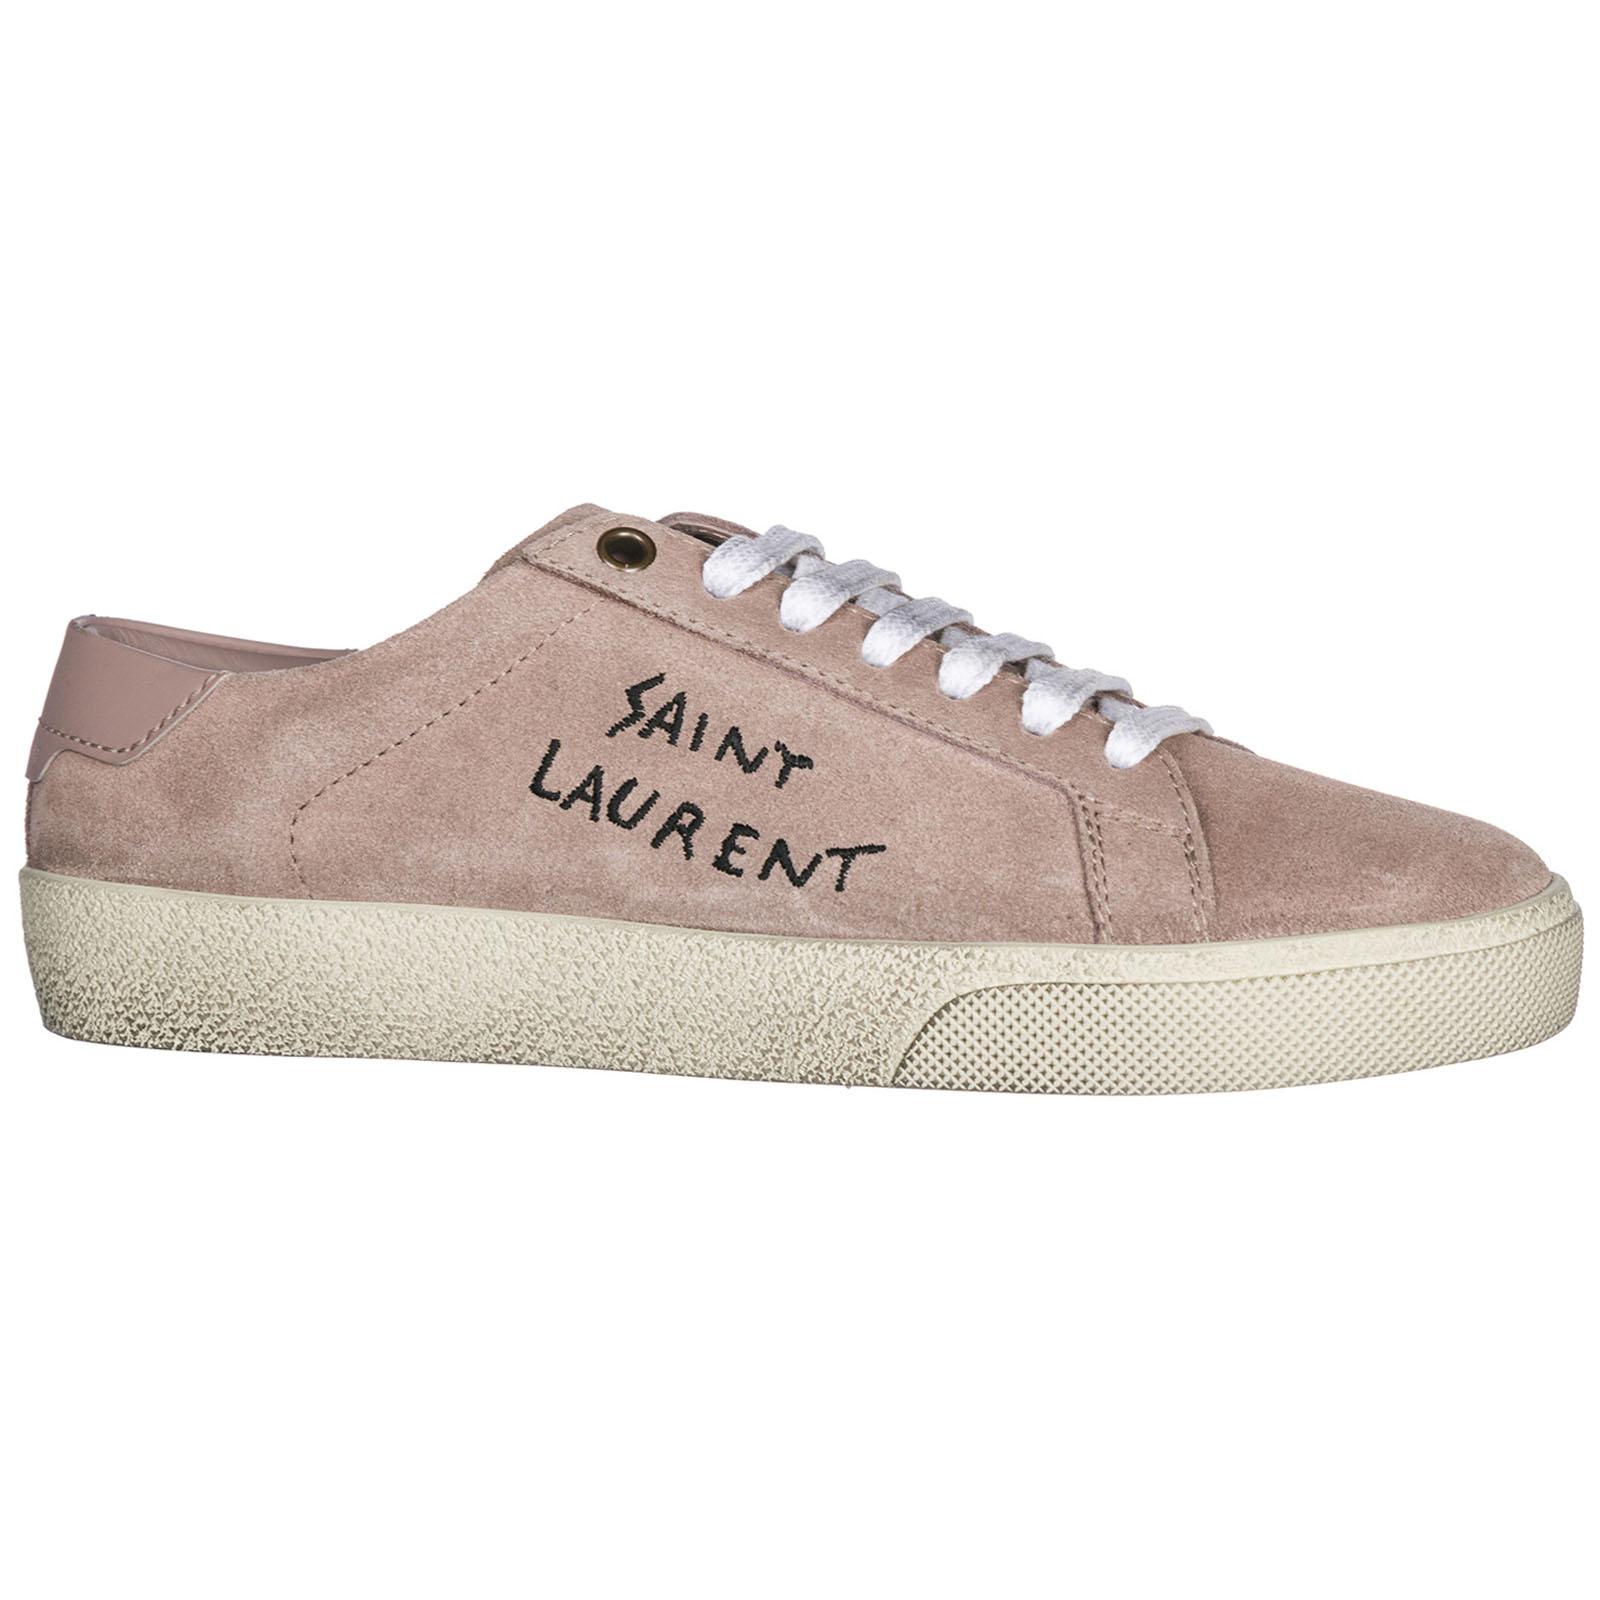 Saint Laurent Shoes Suede Trainers Sneakers in Pink | Lyst